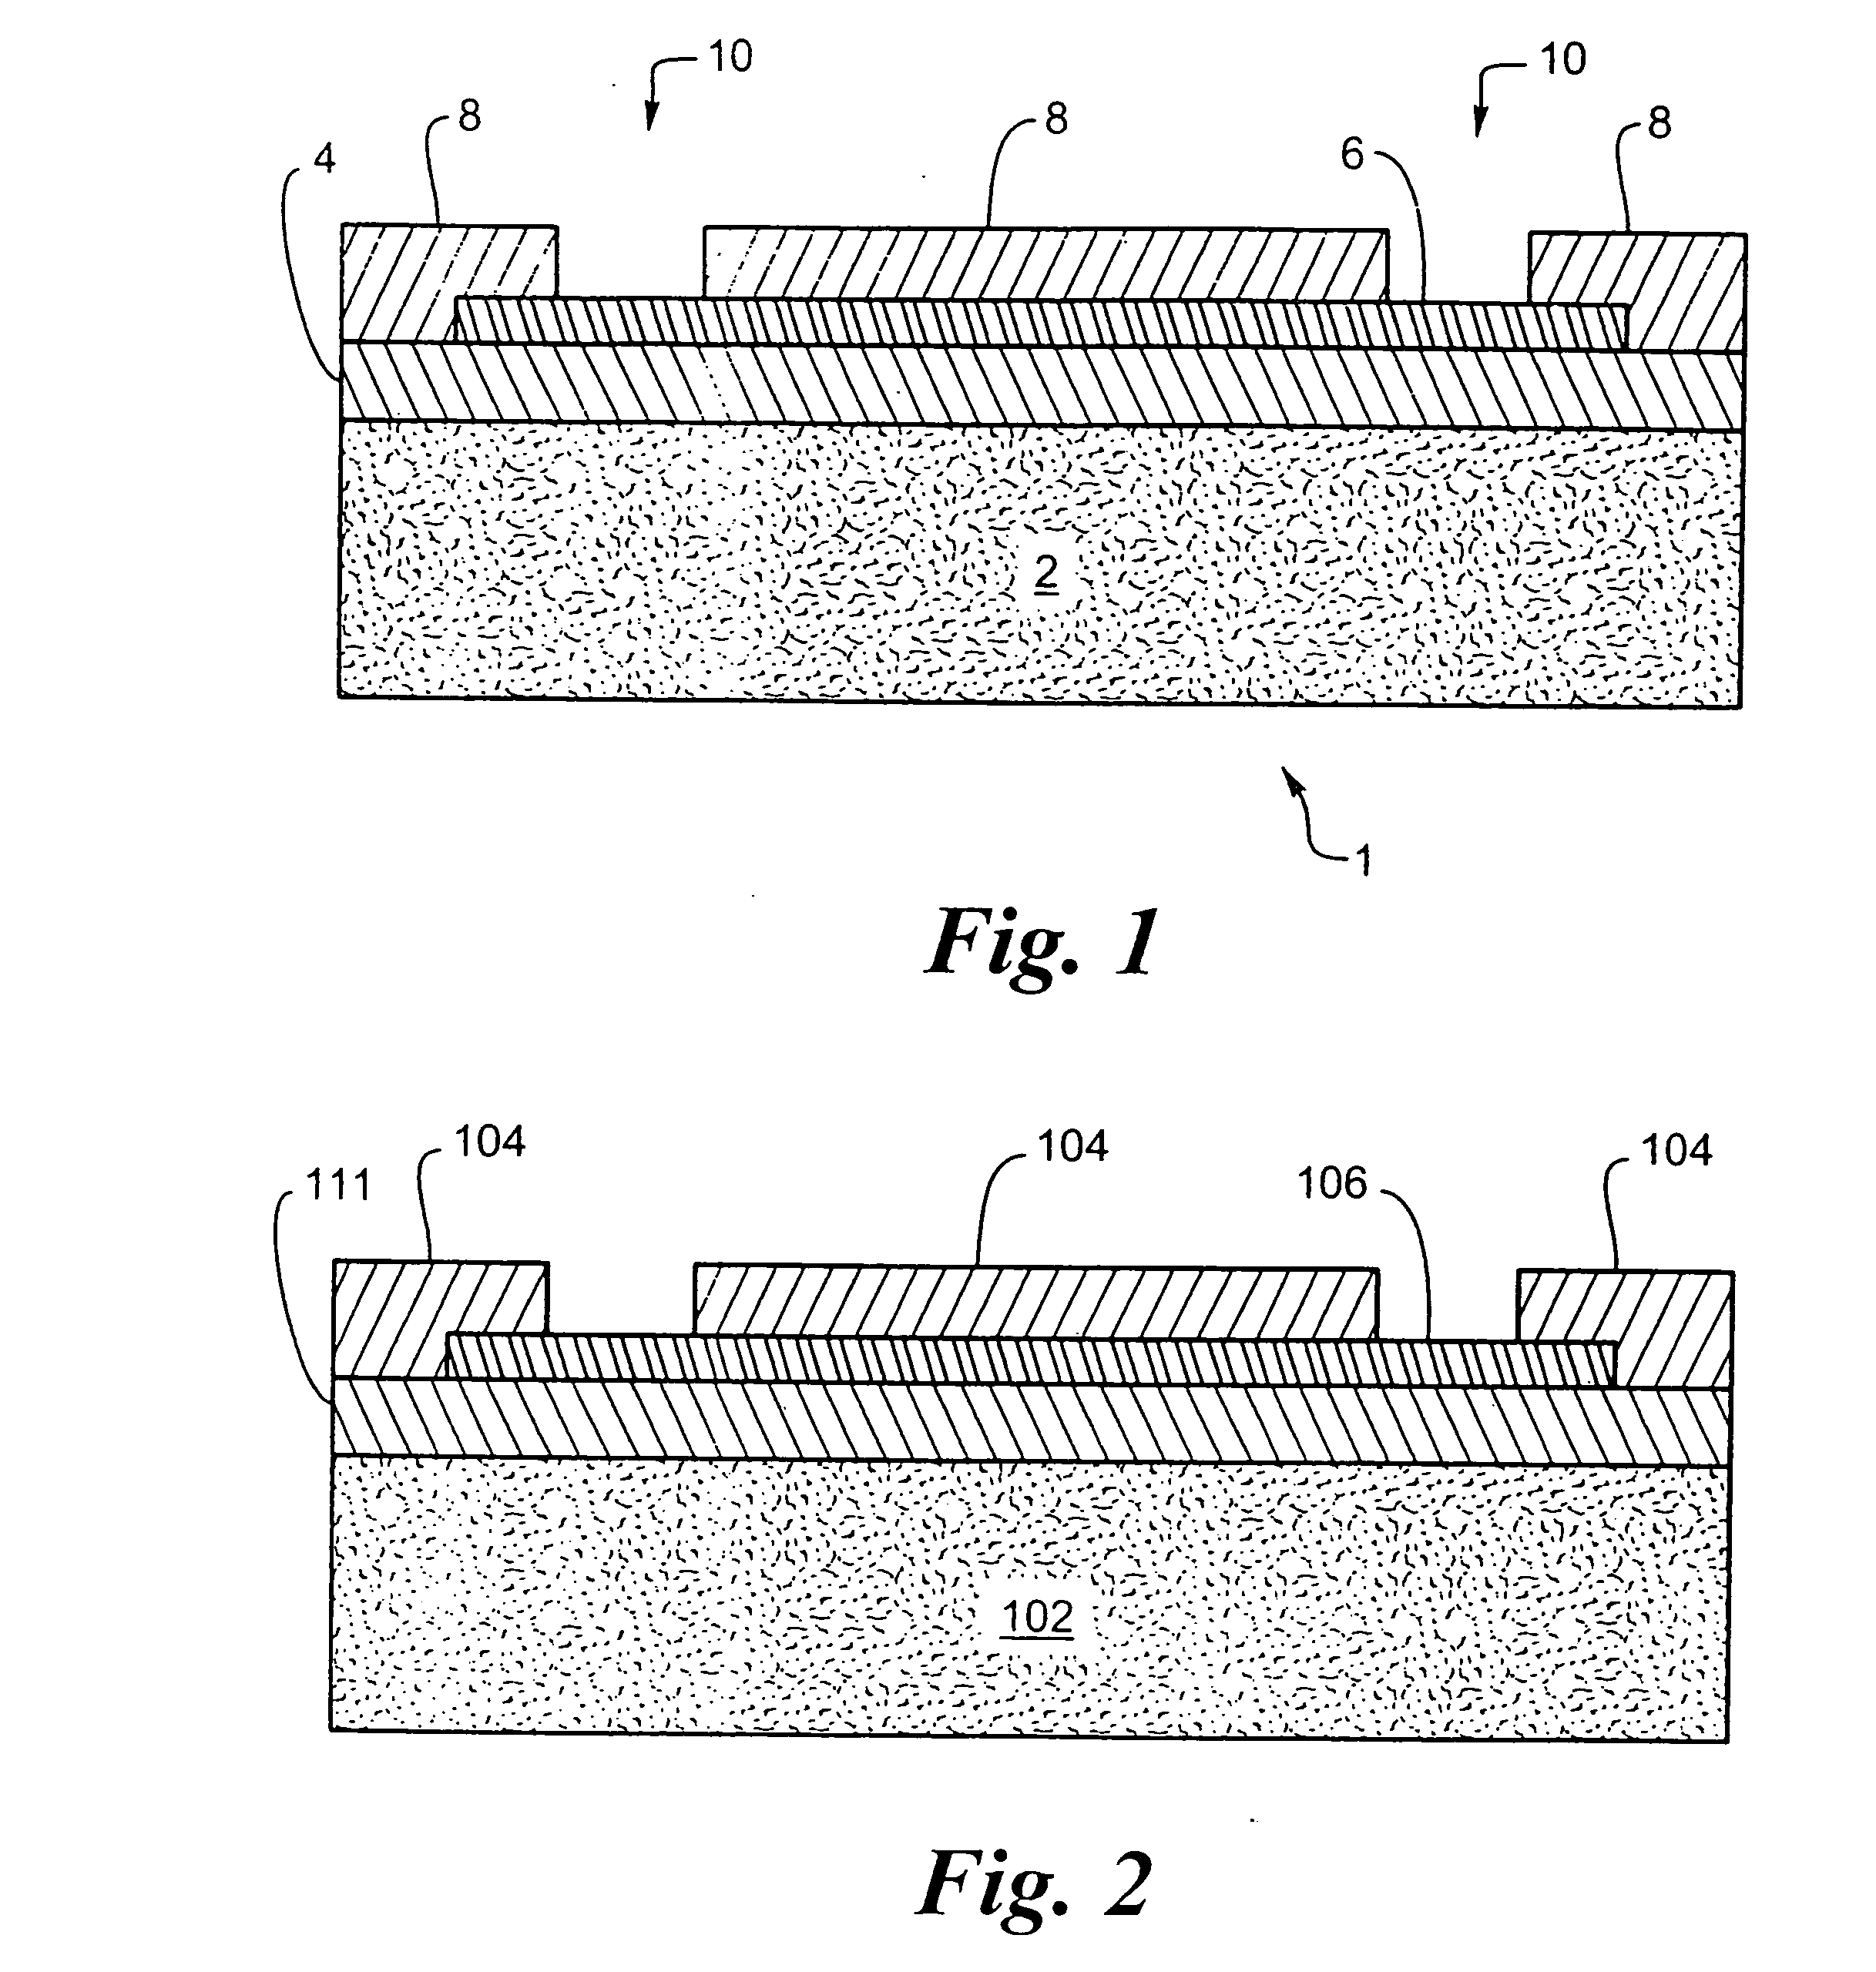 Insulated implantable electrical circuit